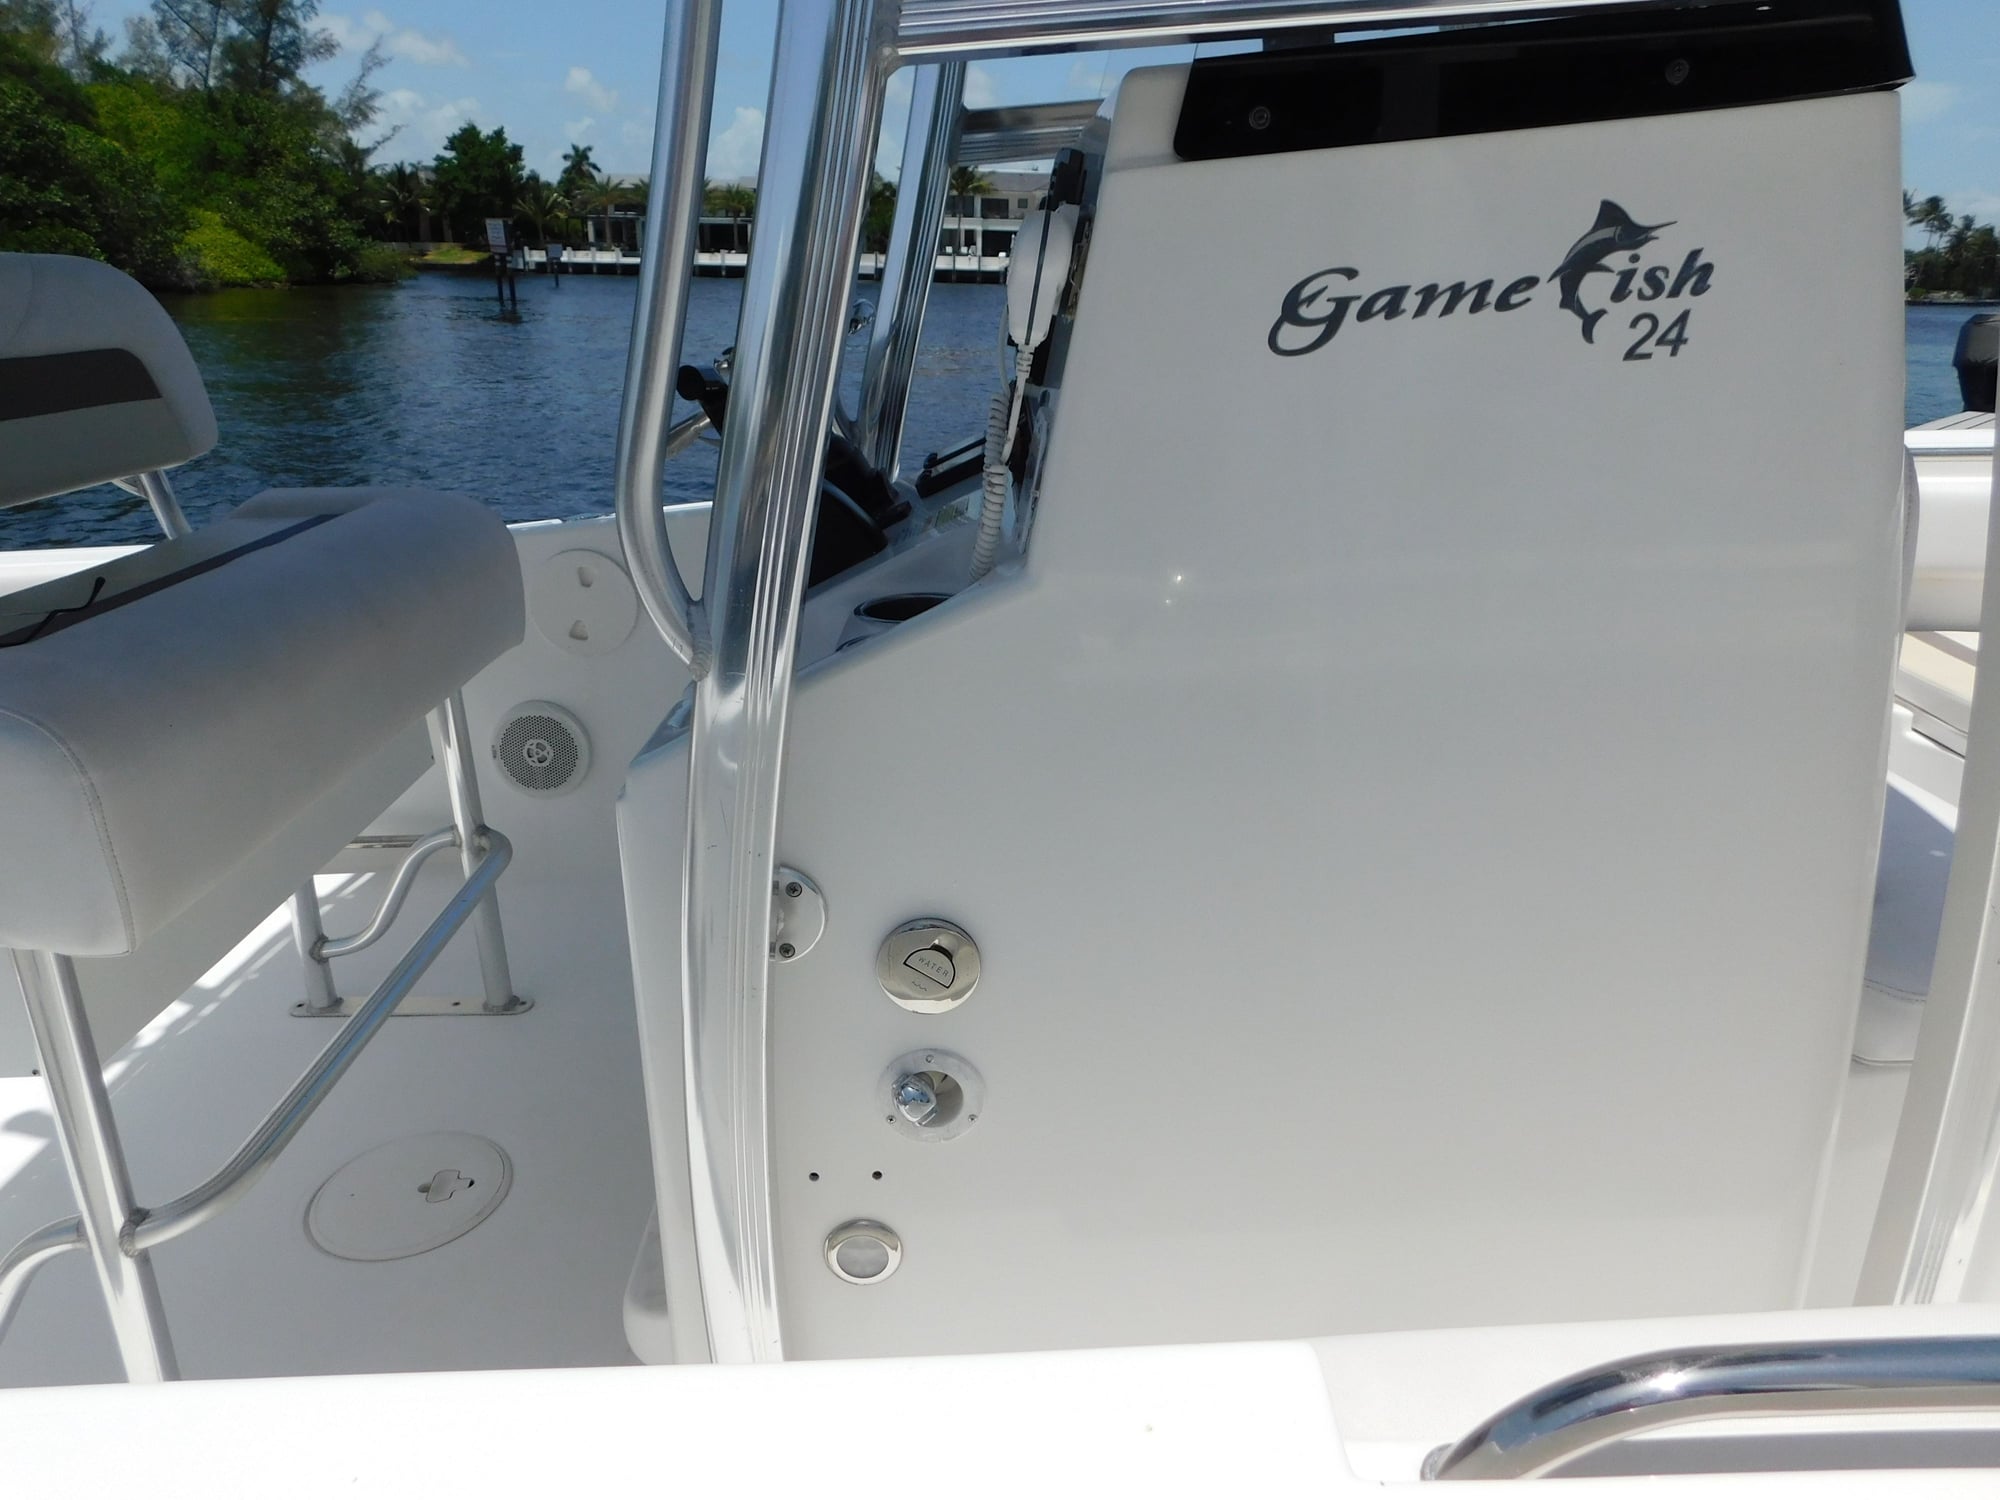 2010 Sea Hunt Gamefish 24 46.5k - The Hull Truth - Boating and